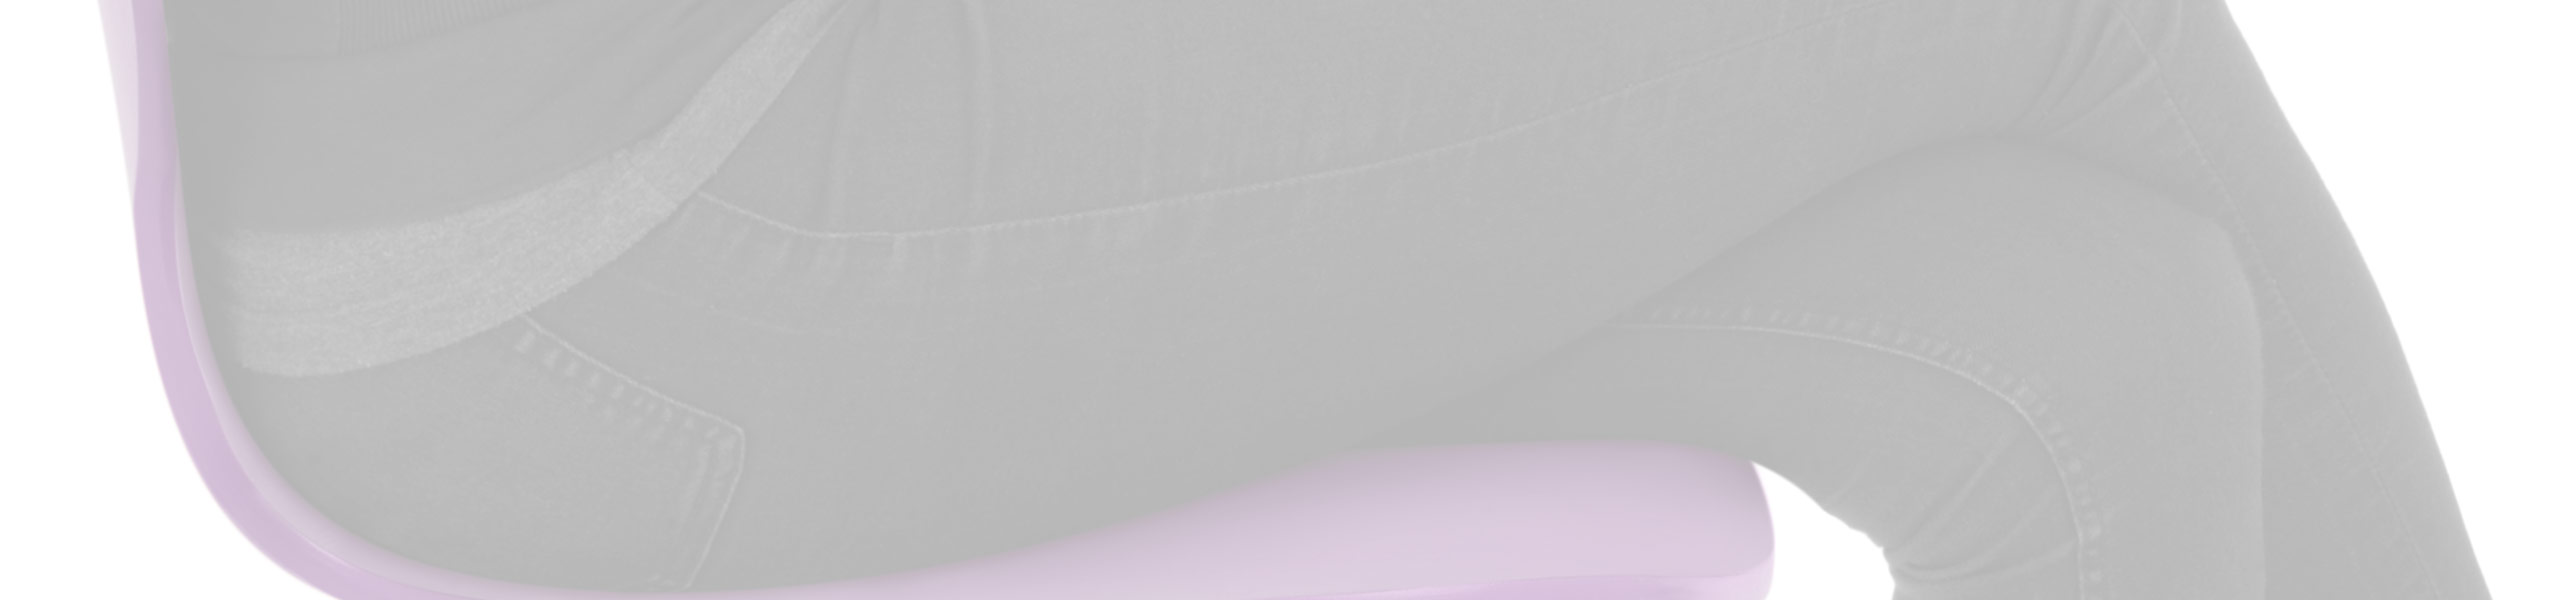 Candy Chair Purple Review Banner